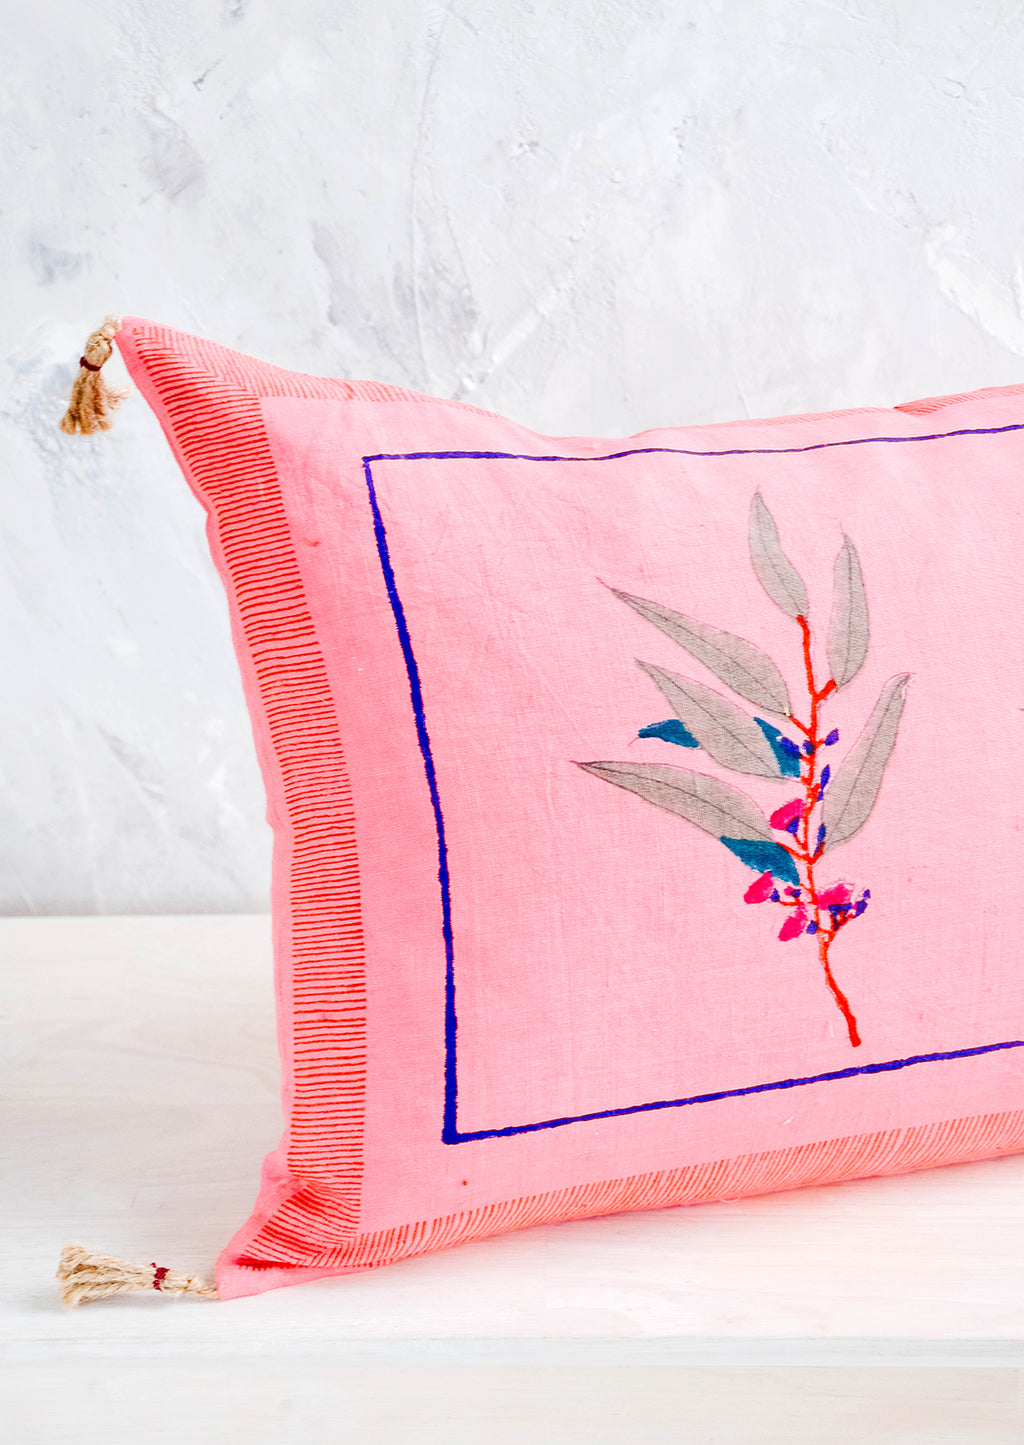 2: Decorative throw pillow in vibrant pink linen with block printed floral detail and jute tassels at corners